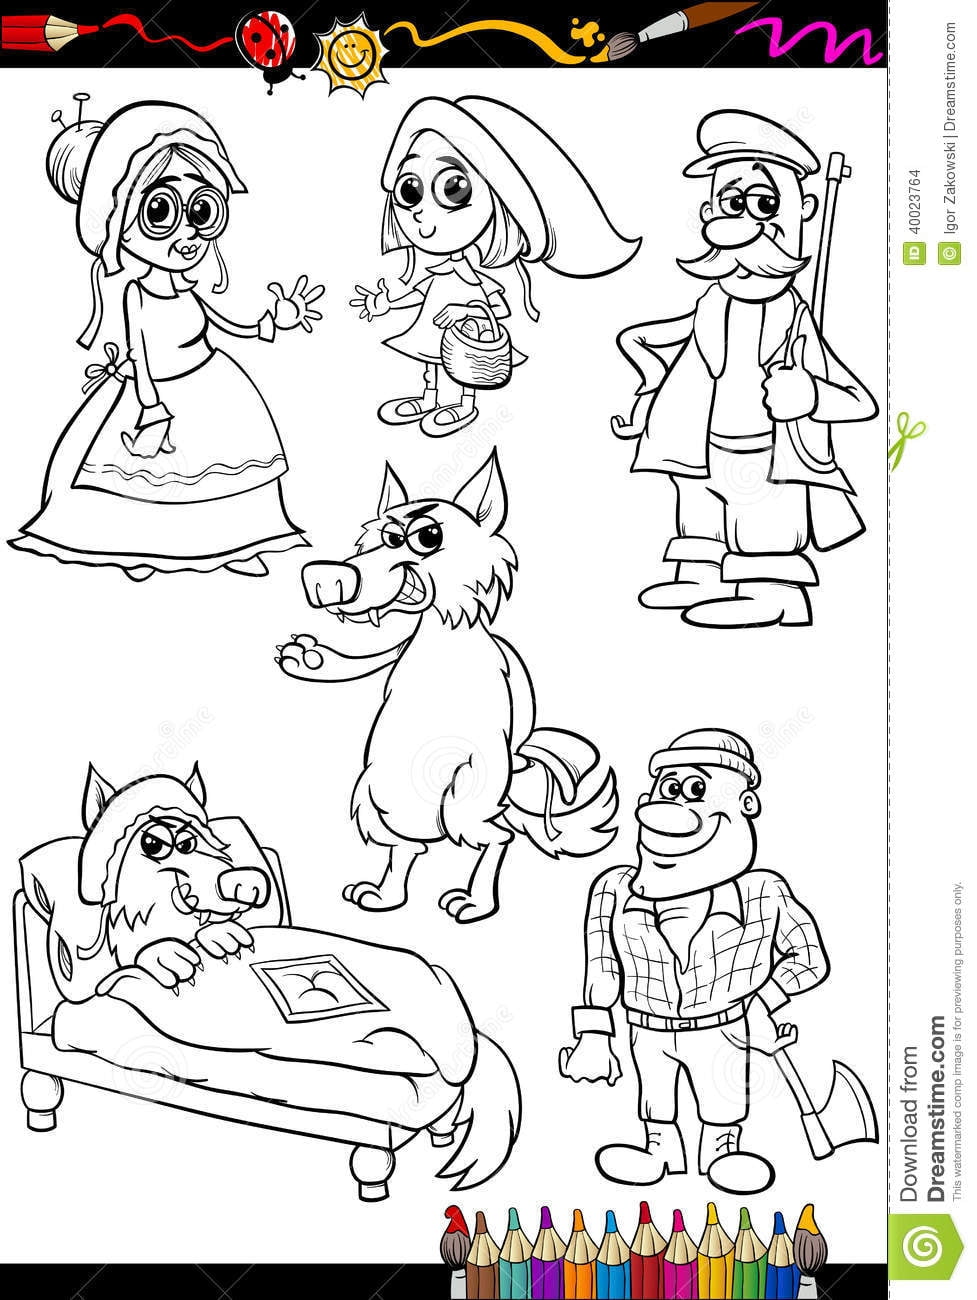 Red Riding Hood Coloring Stock Illustrations 75 Red Riding Hood Coloring Stock Illustrations Vectors Clipart Dreamstime